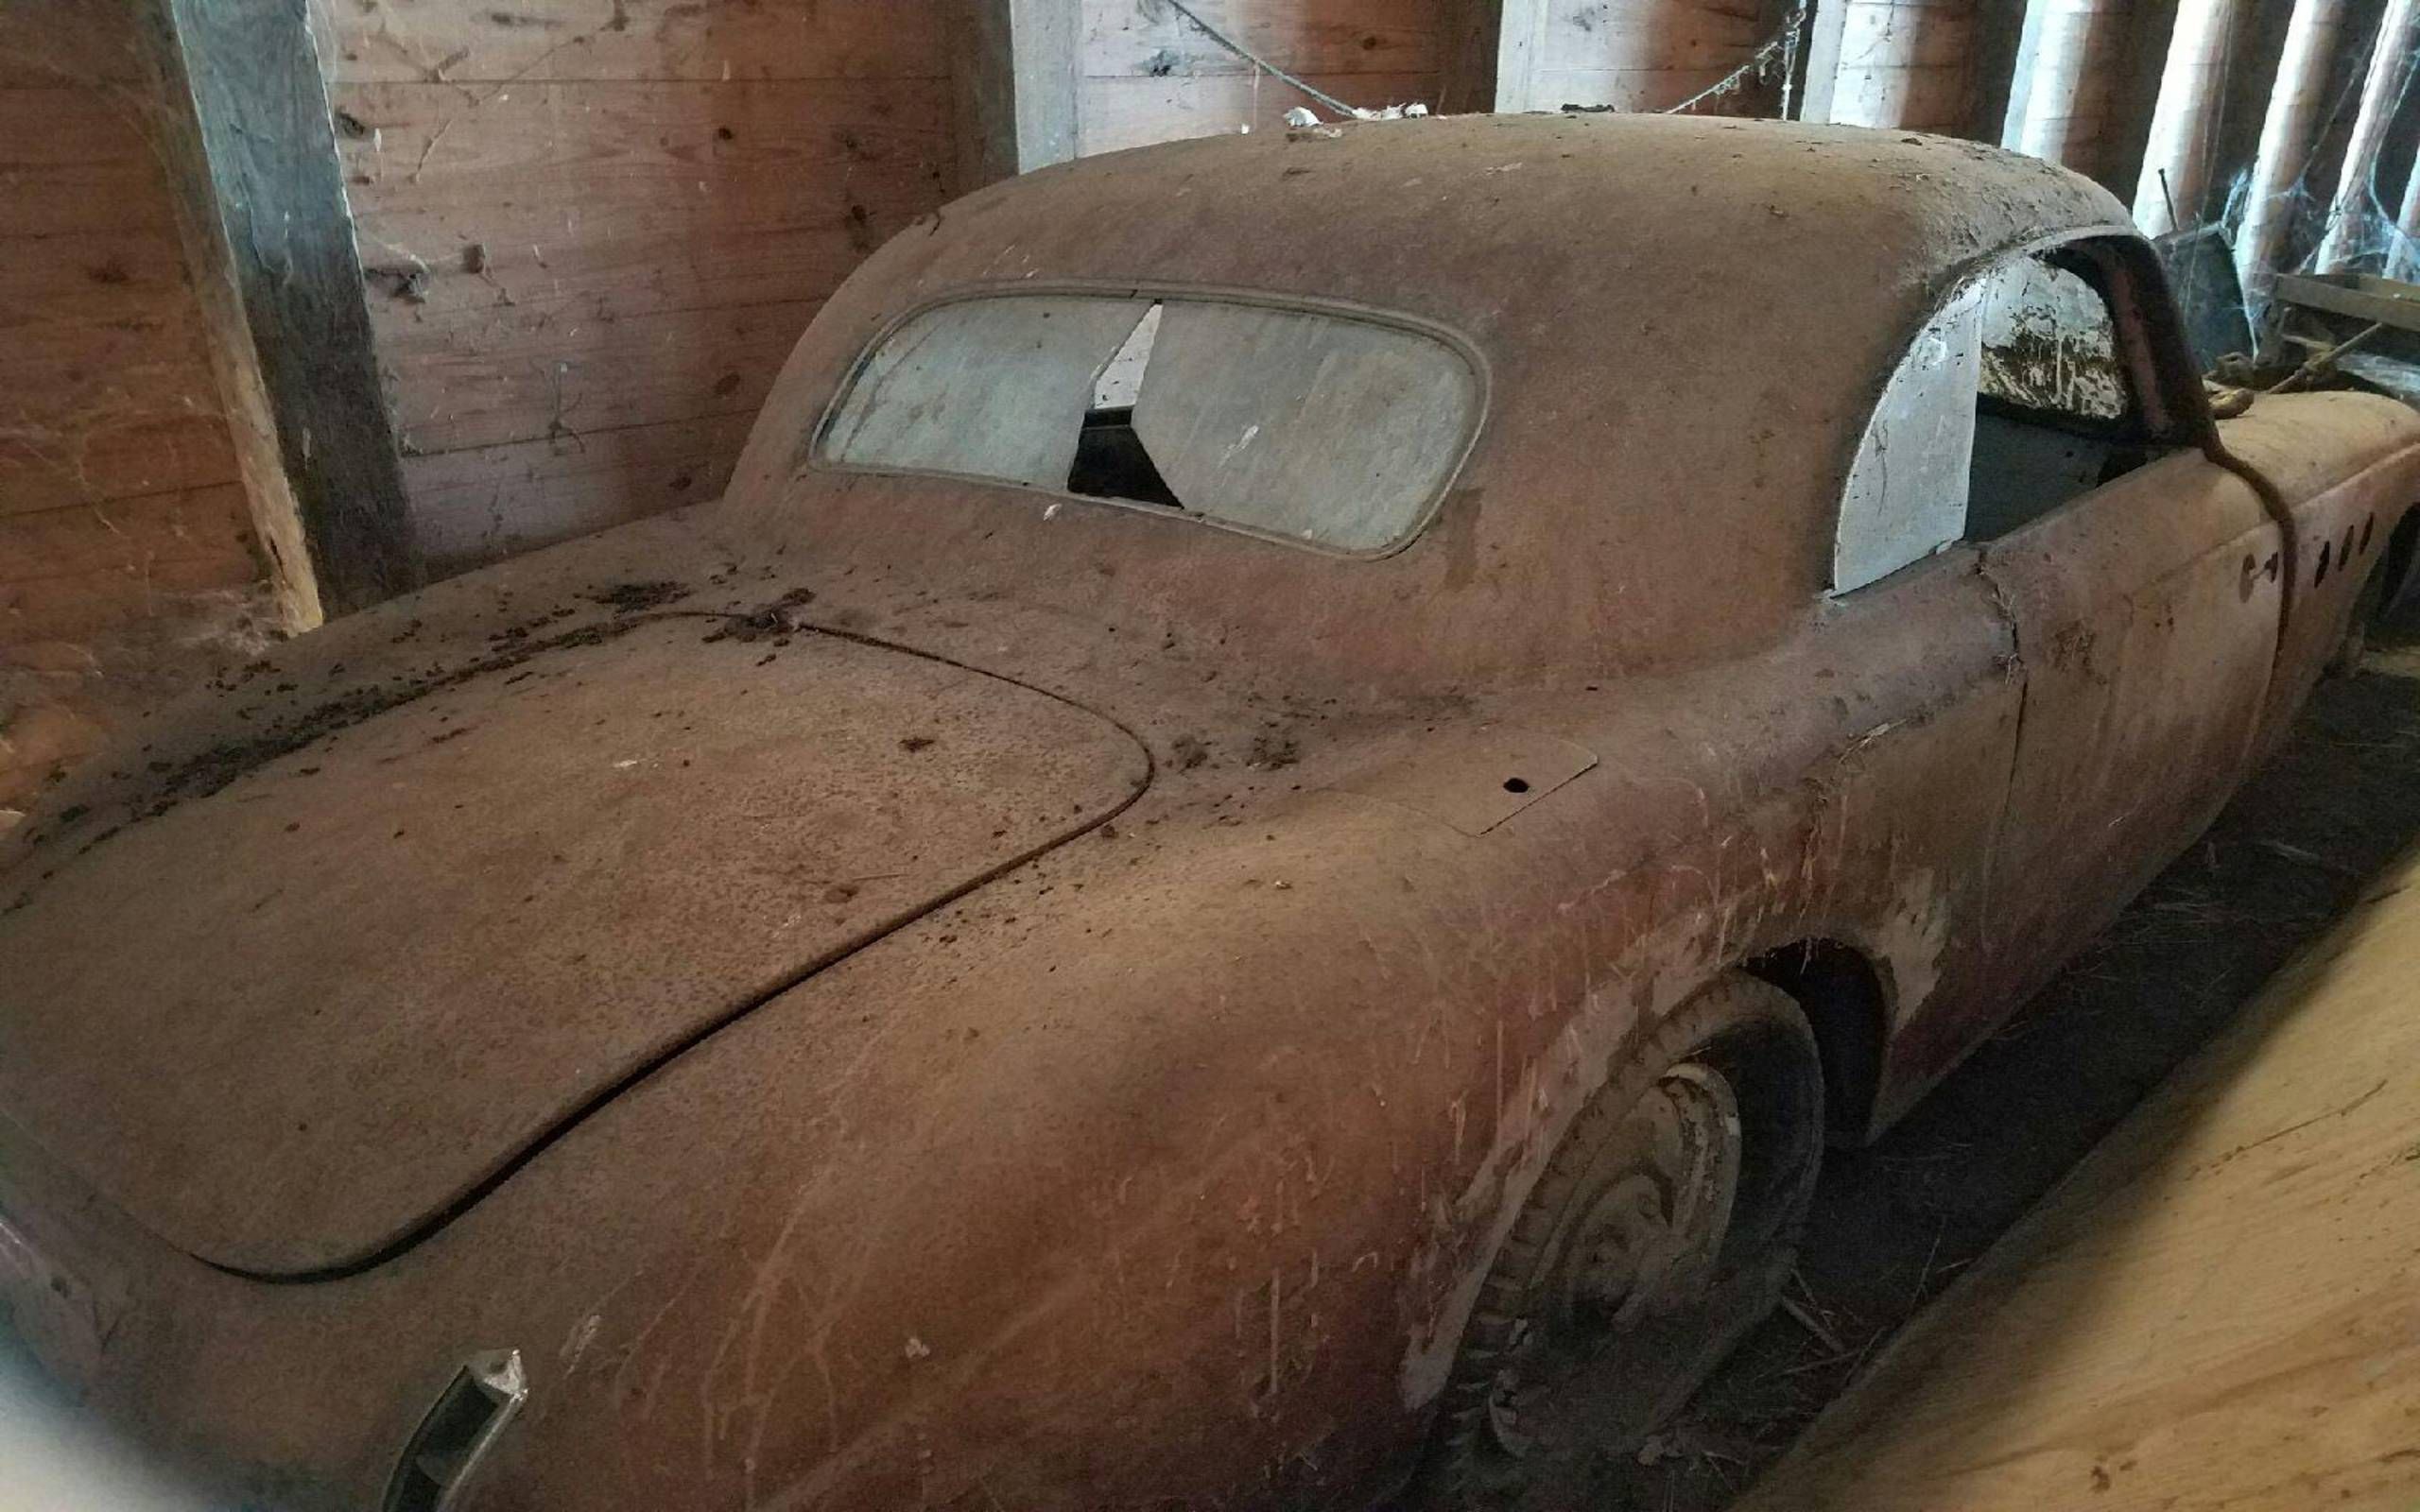 European cars in rural Tennessee! I also found an OLD shed with BMW, Volvo  and Mercedes symbols painted on it. cool car finds! : r/namethatcar